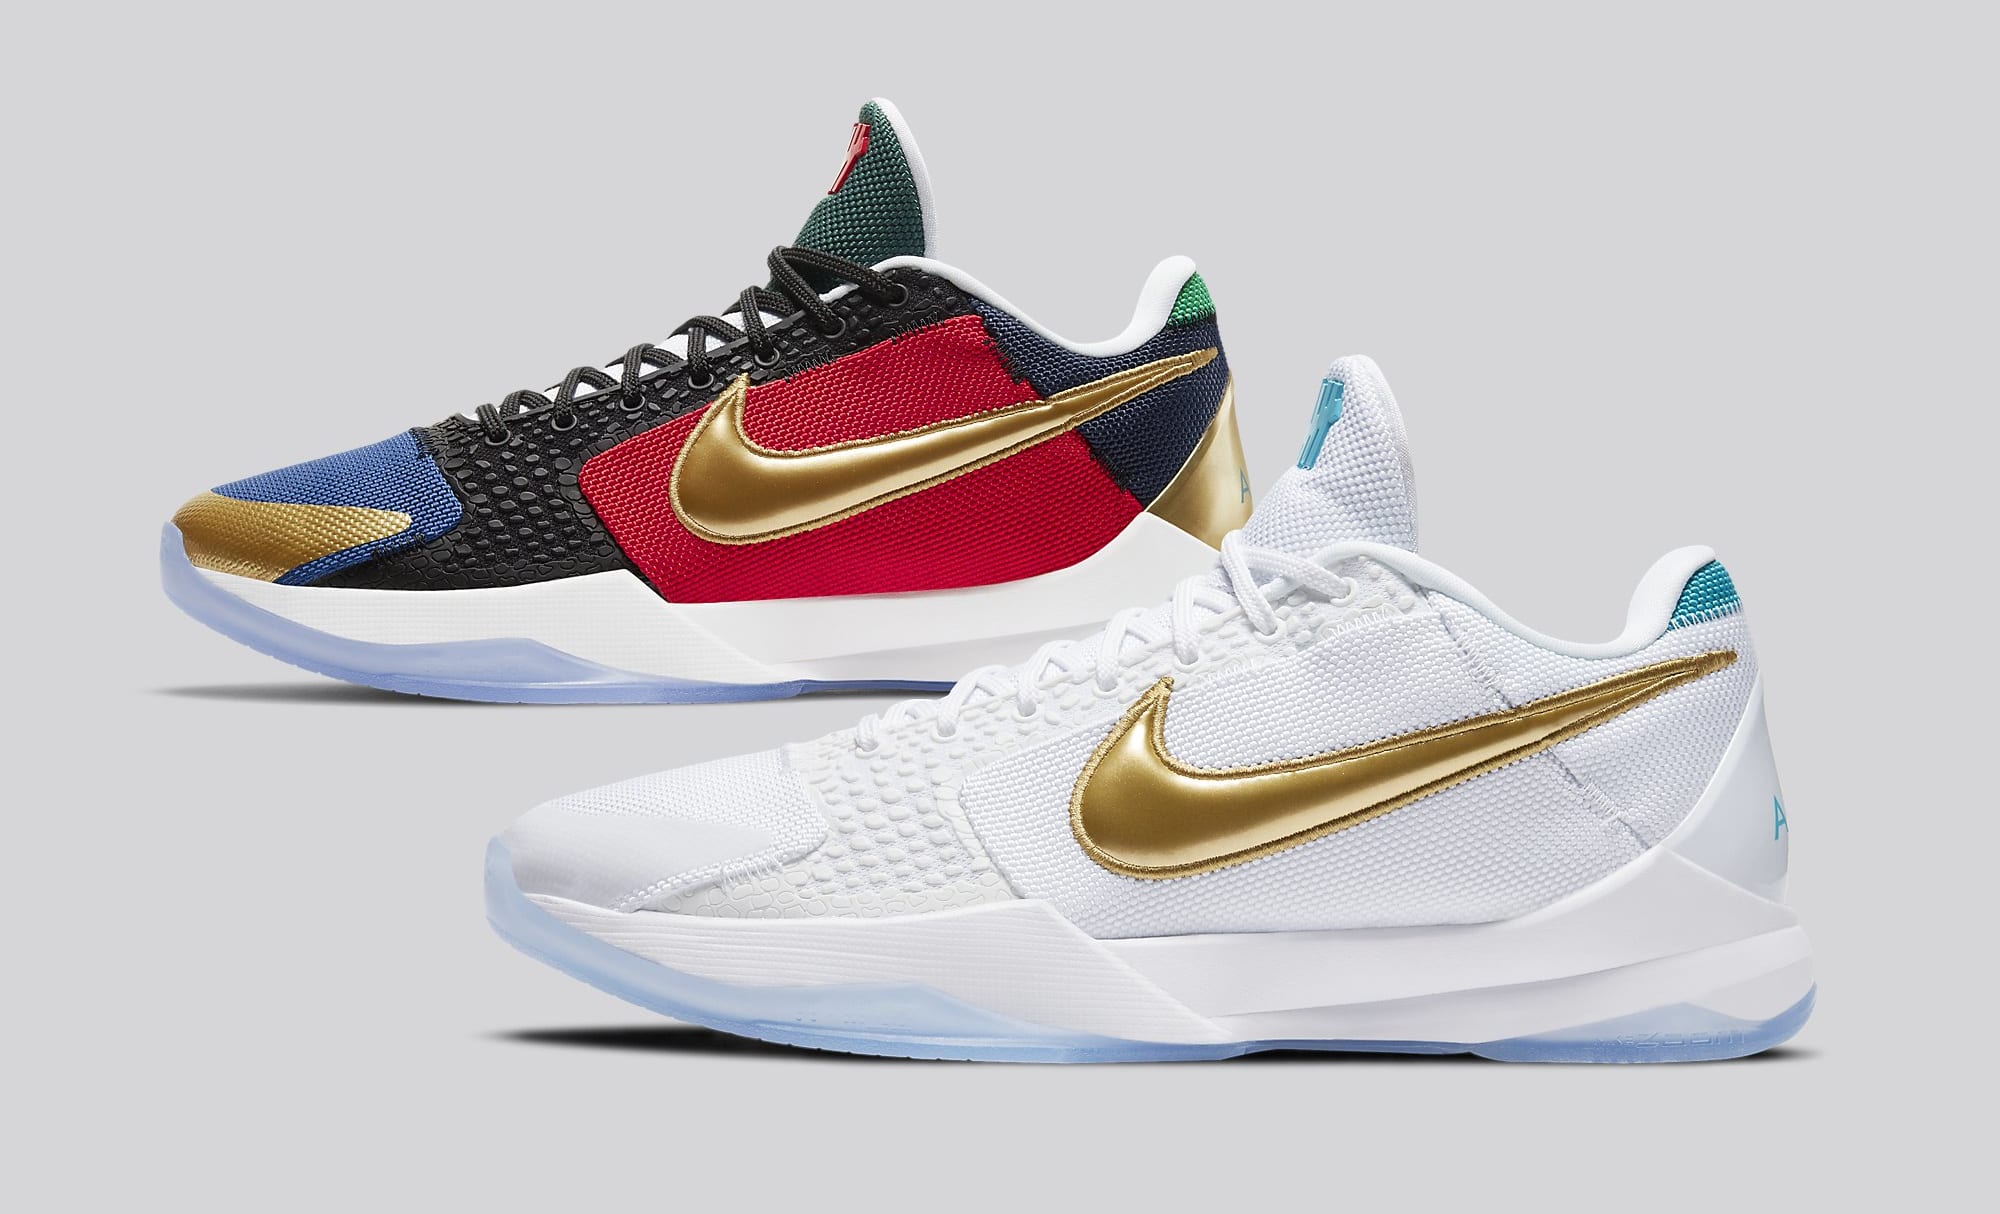 Undefeated x Nike Kobe 5 Protro &#x27;What If&#x27; Pack DB5551-900 Lateral